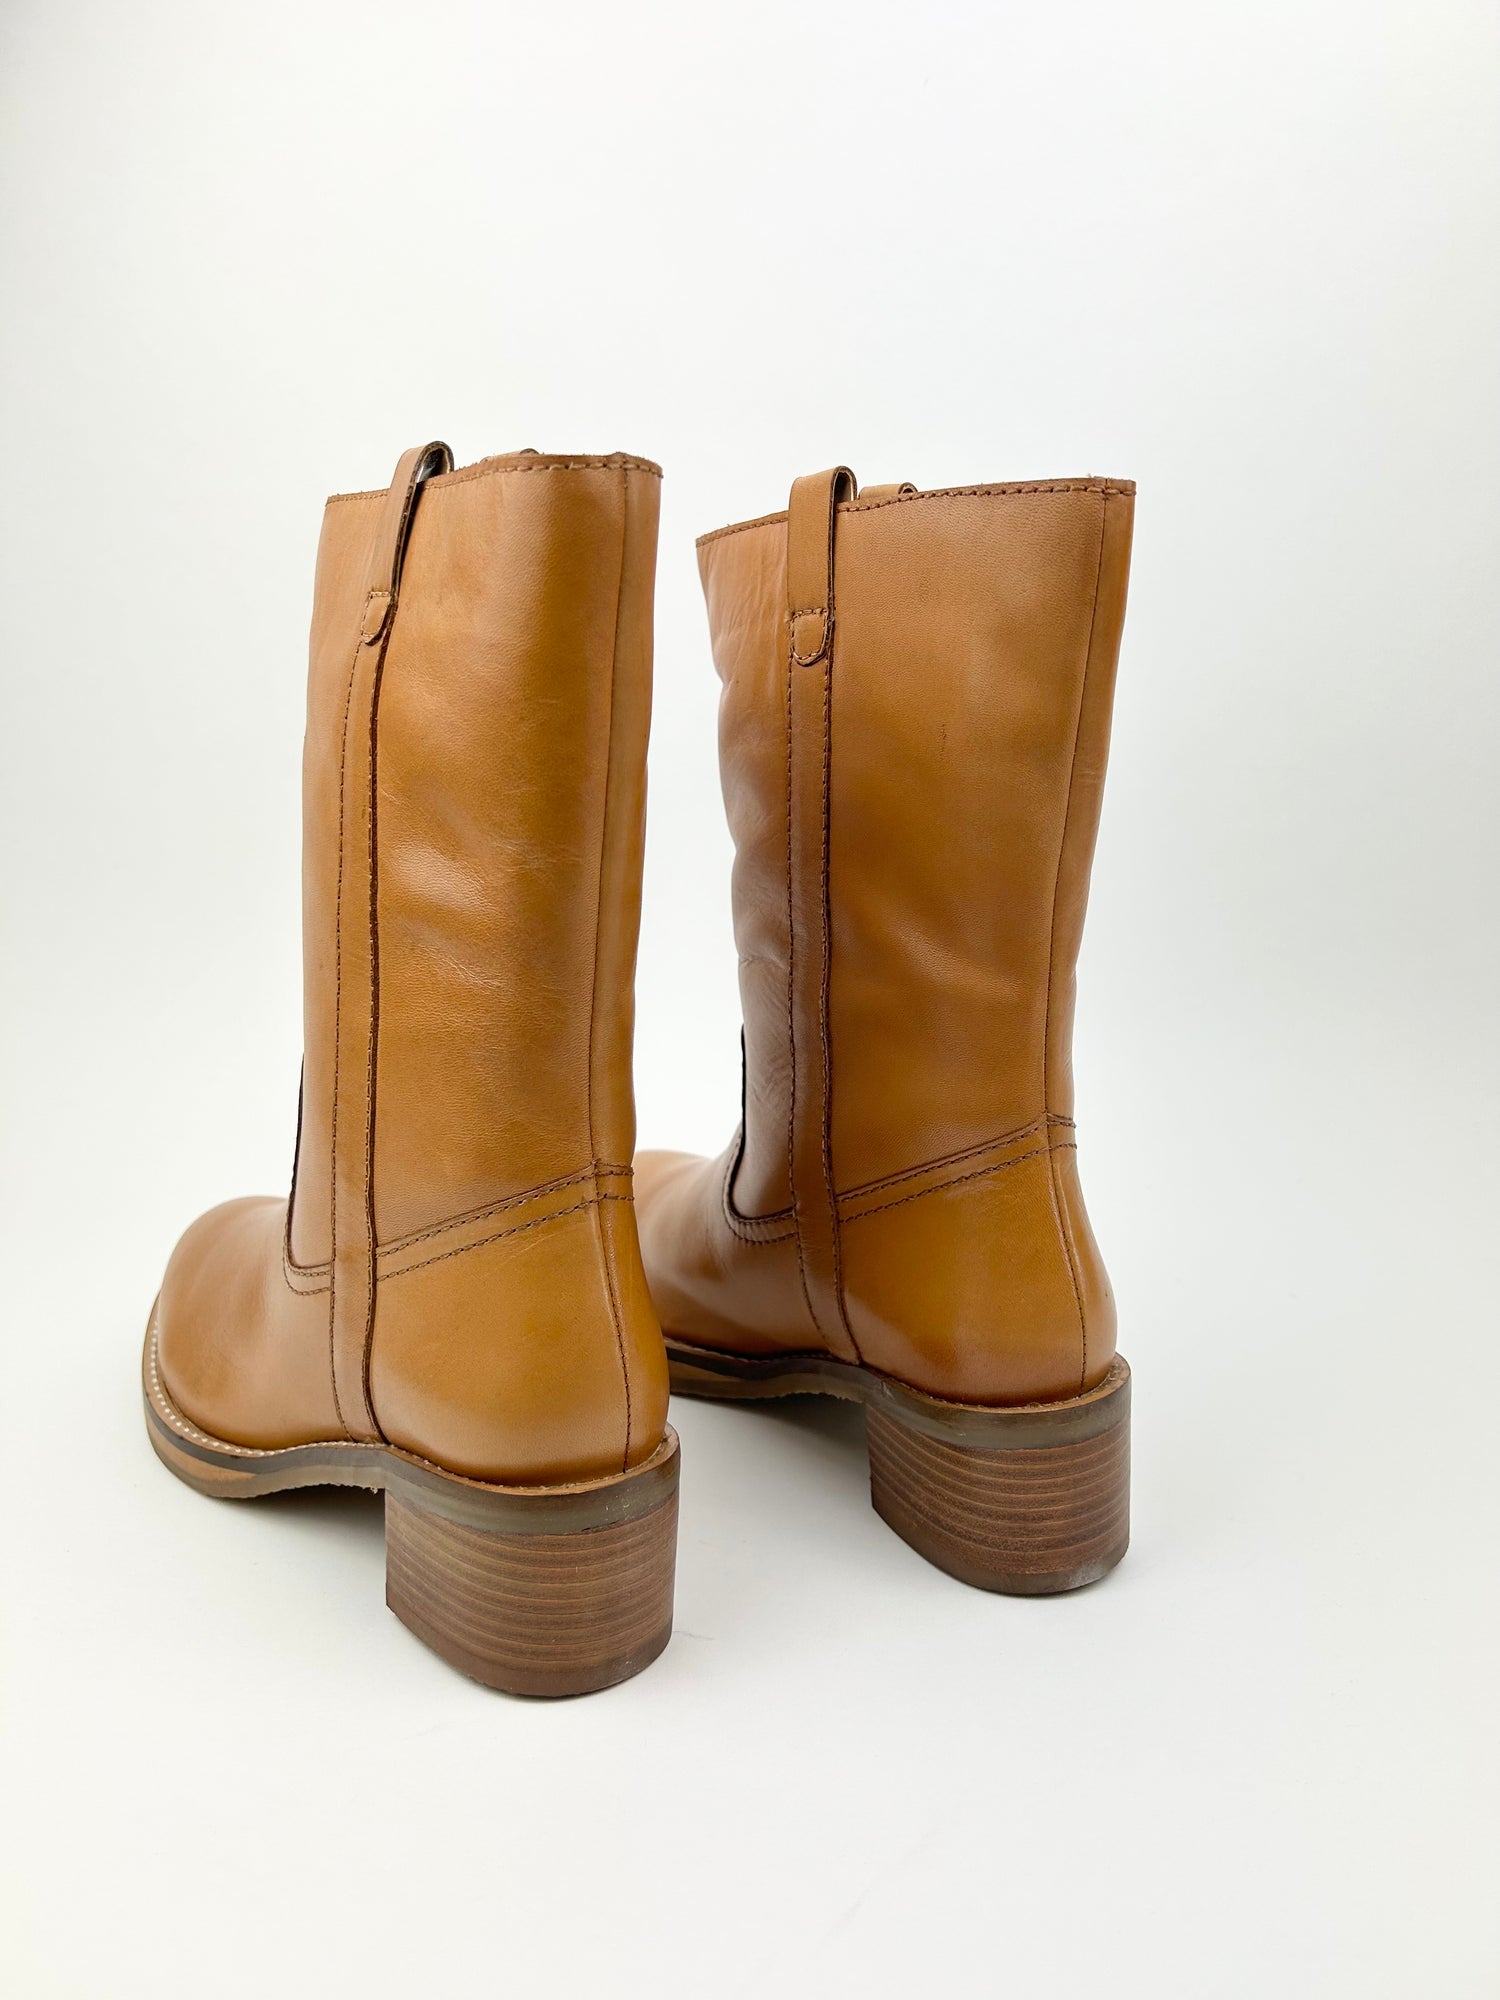 Crush It Boot- Cognac Shoes in  at Wrapsody